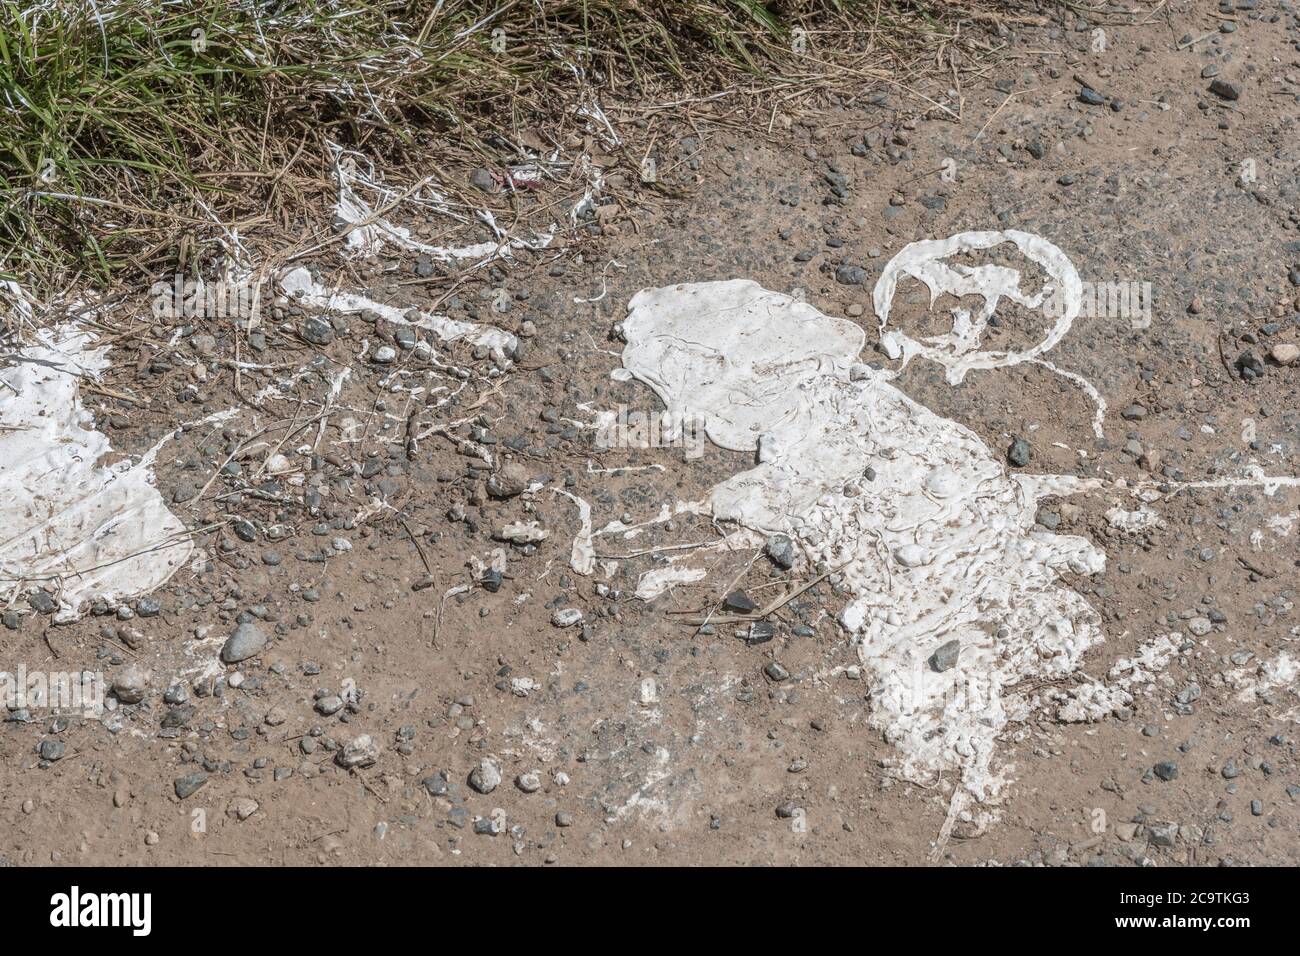 Abstract shapes of a thick white paint on rural road. Possibly road marking mastic. Old paint texture, abstract shapes, paint spillage. Oops! Stock Photo